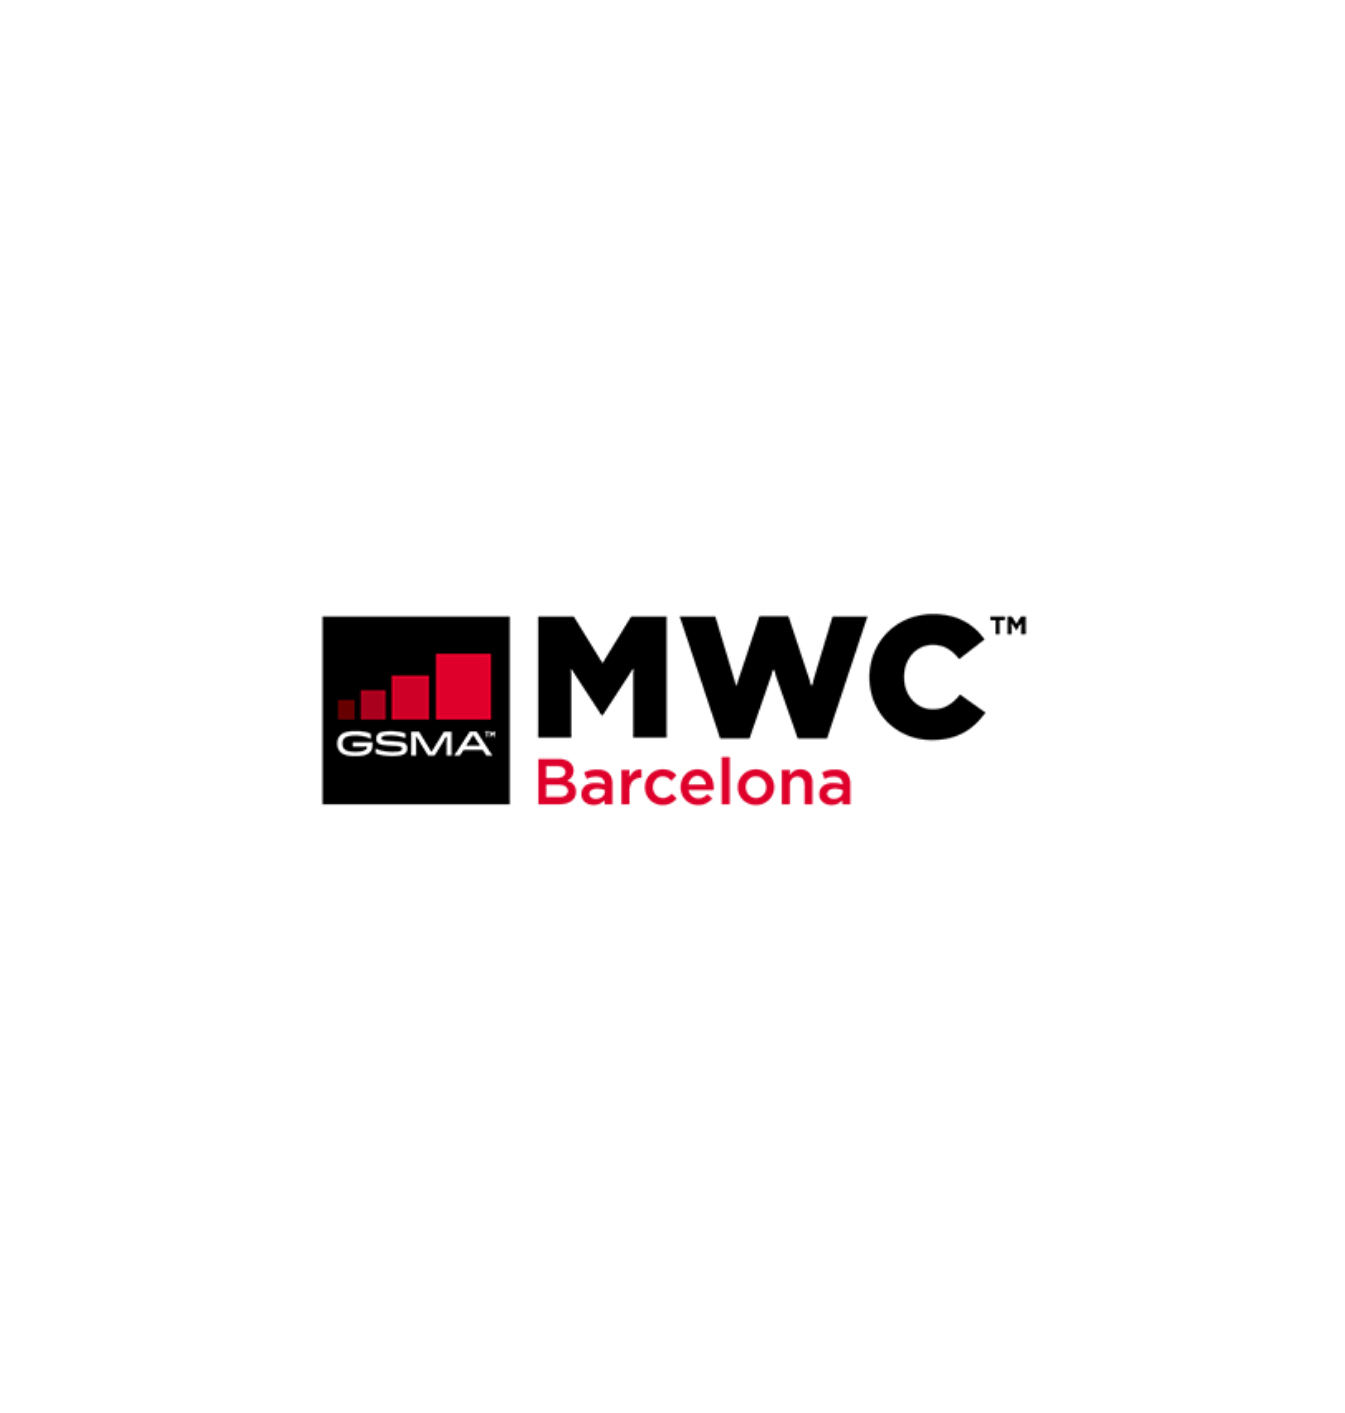 Mobile World Congress (MWC) 2023